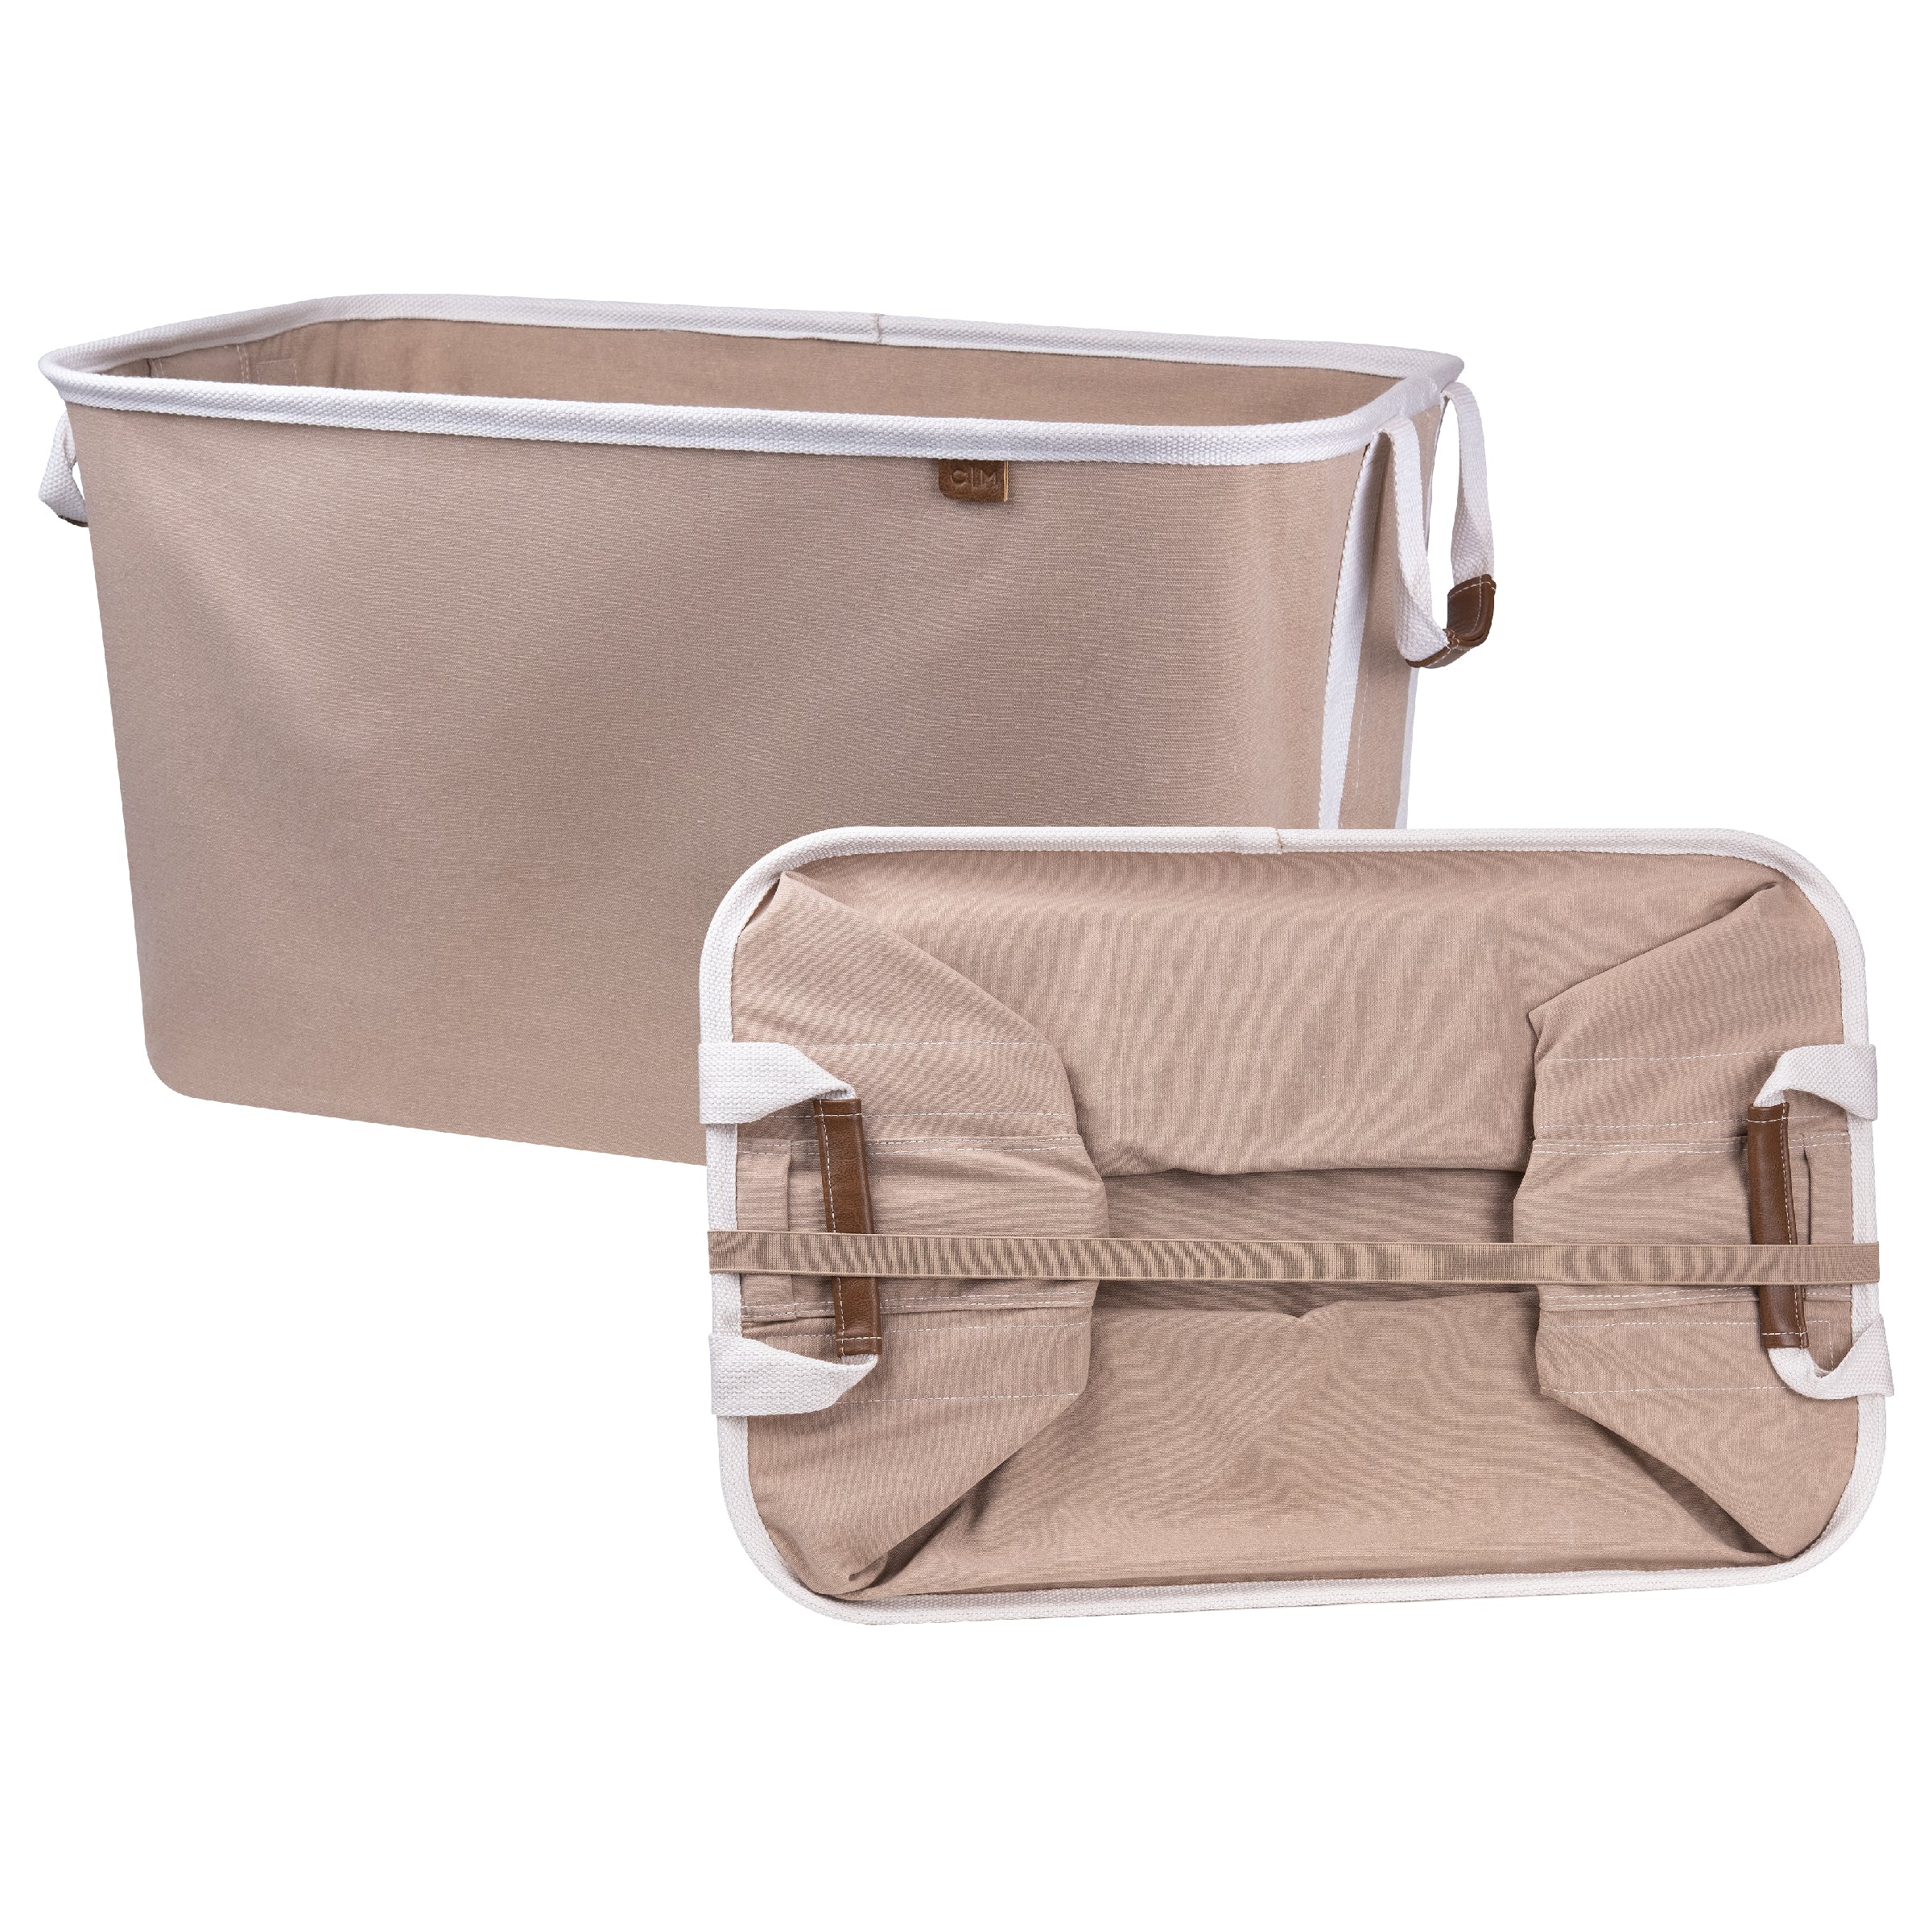 Collapsible Laundry Basket LUXE